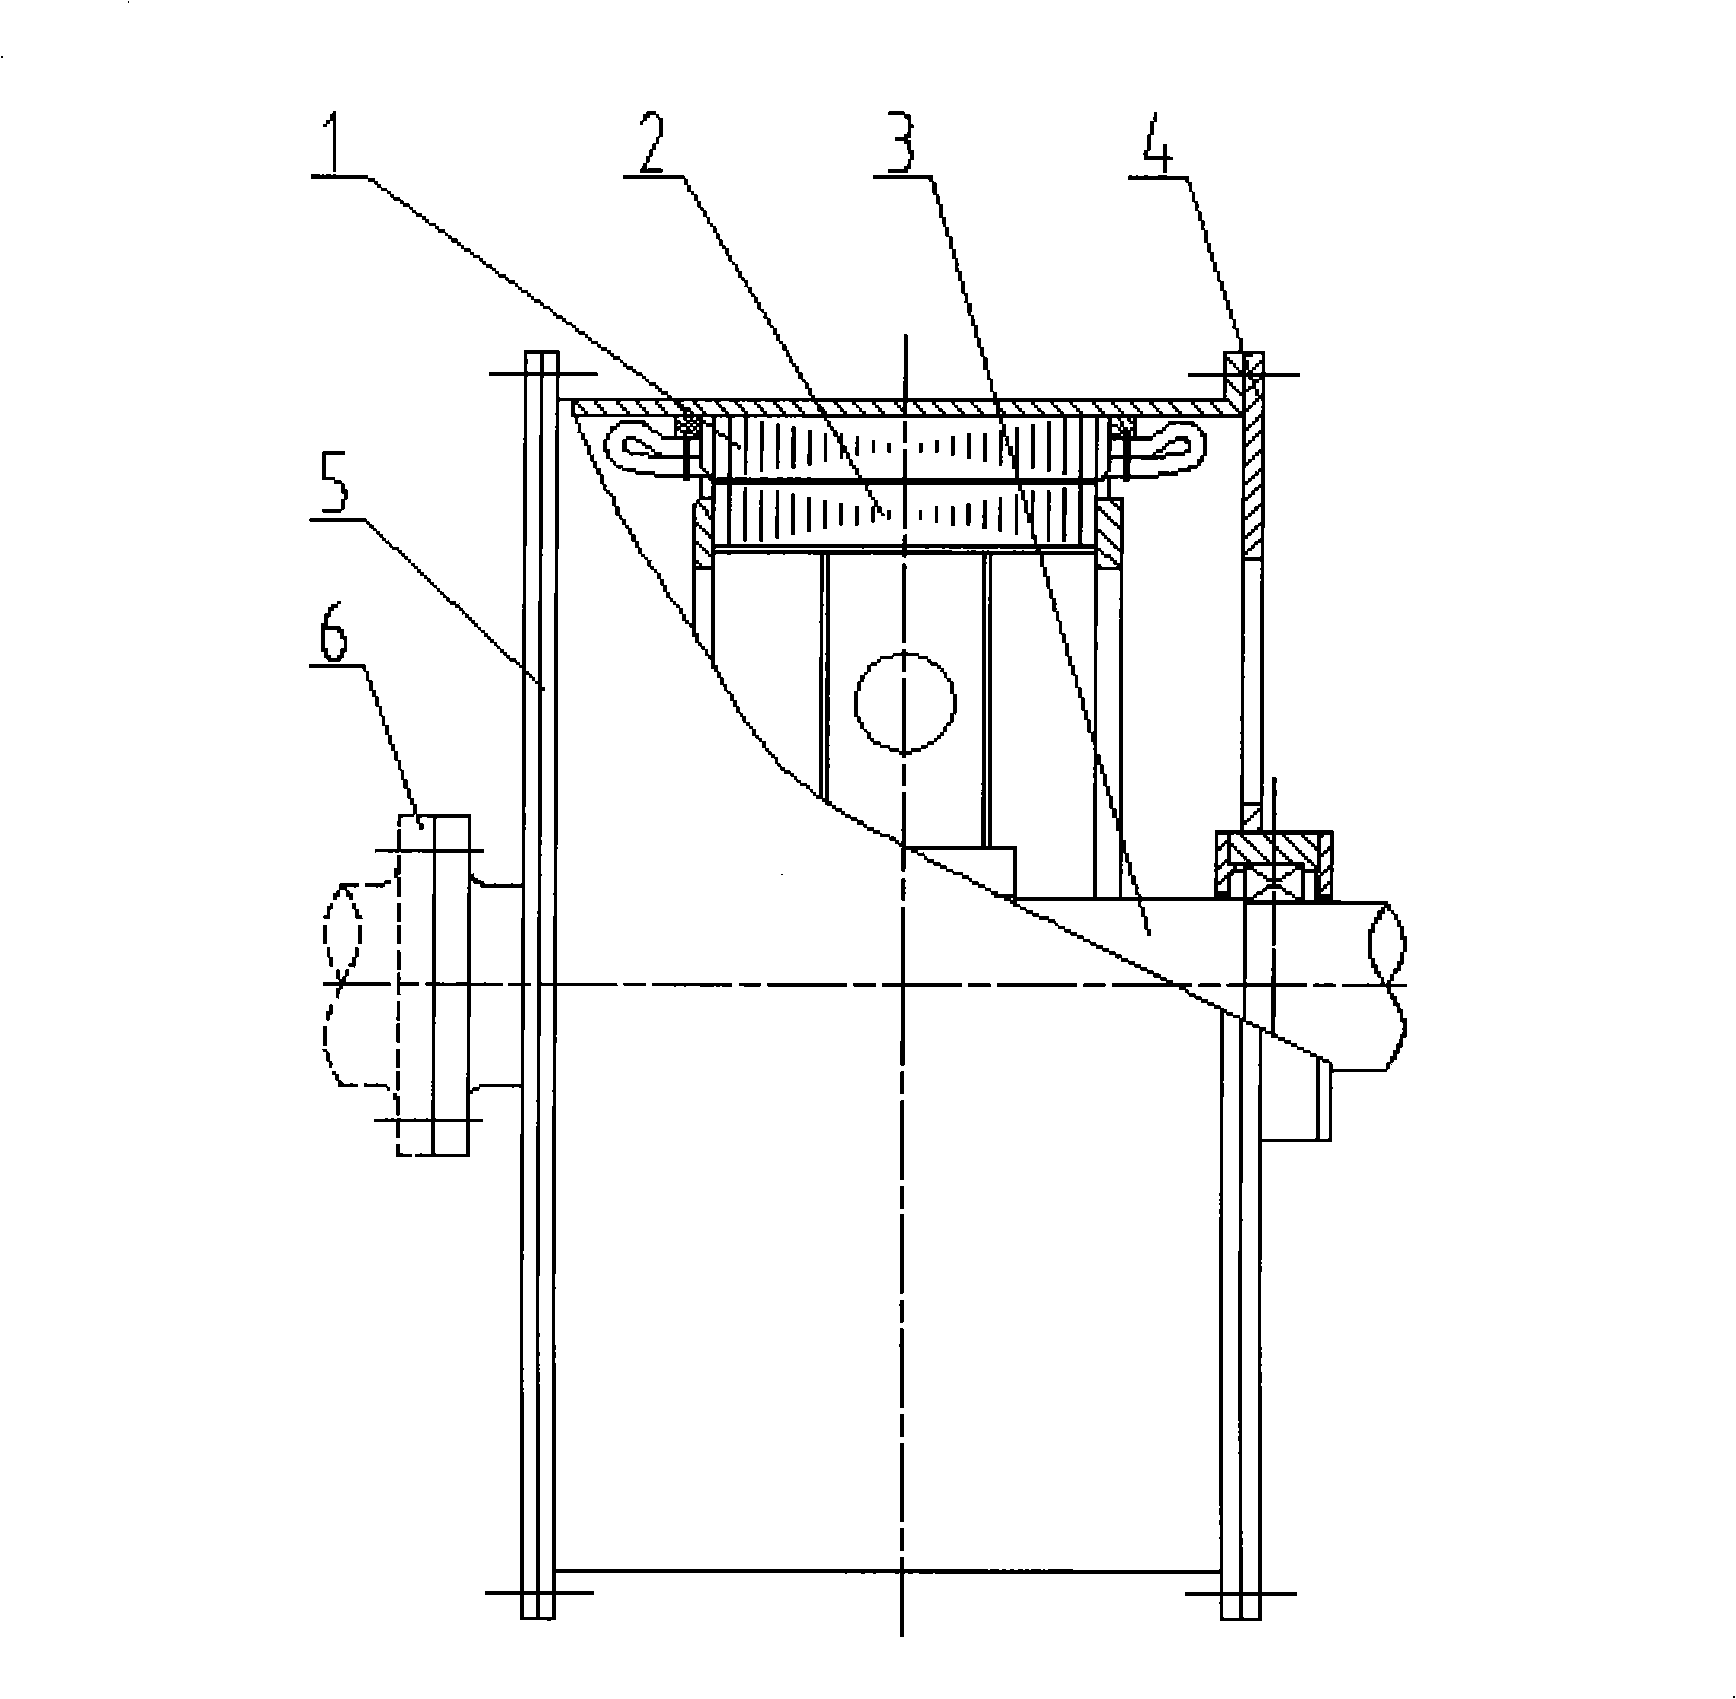 Large-sized speed-changing wind power generator with embedded permanent magnet